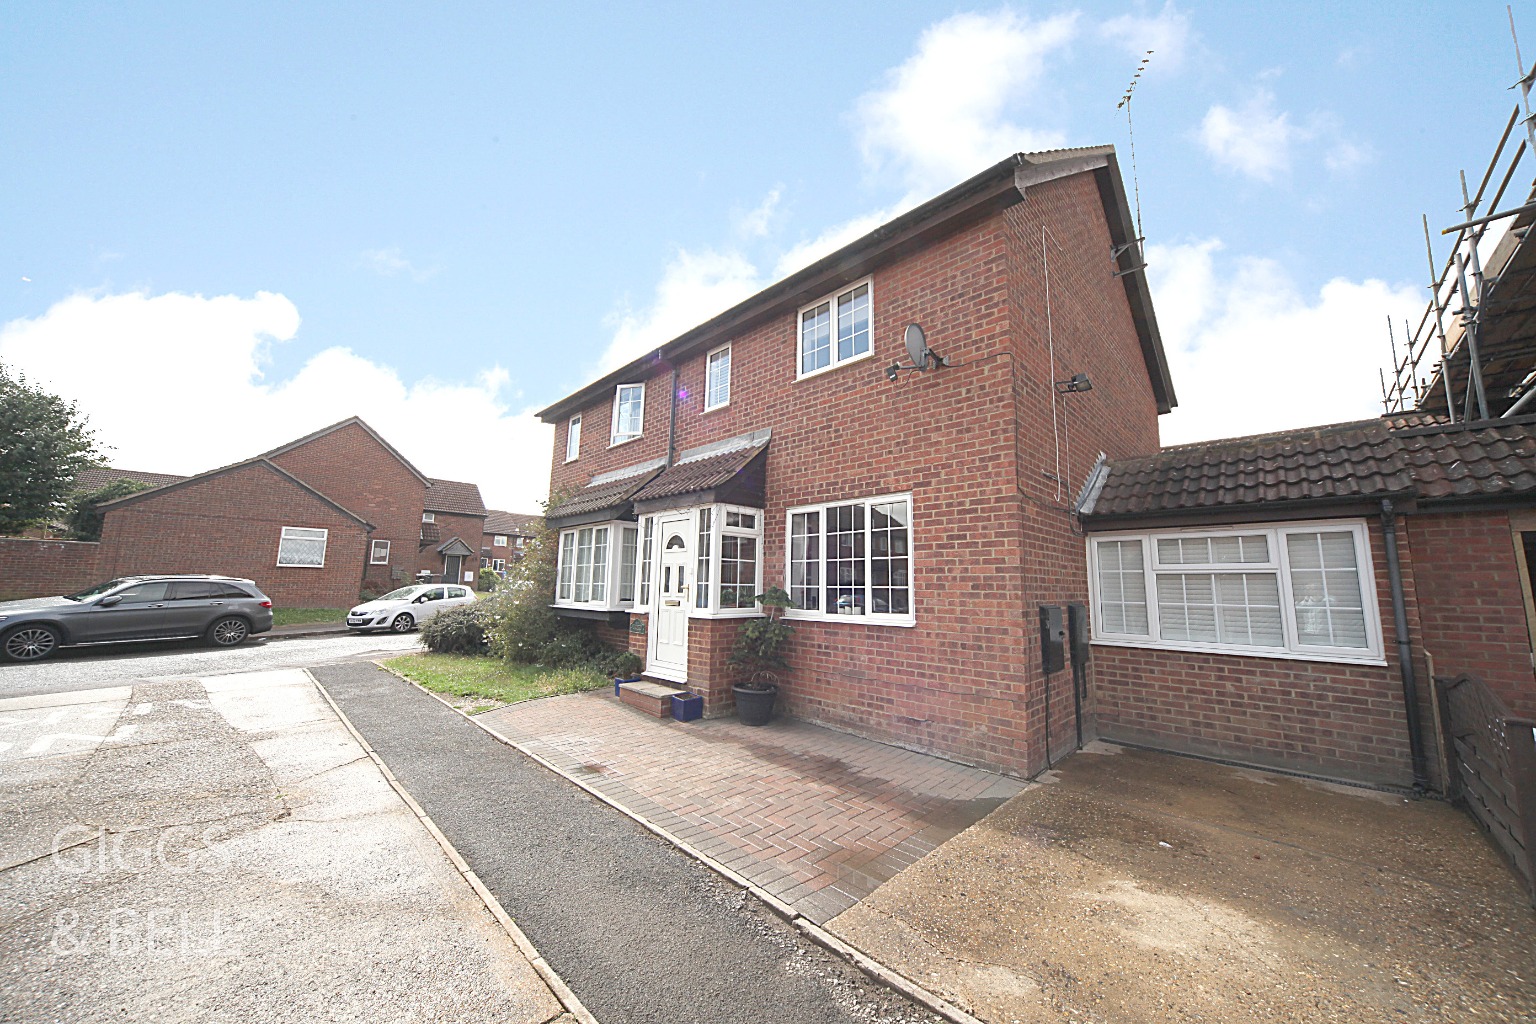 4 bed semi-detached house for sale in Field Fare Green, Luton - Property Image 1